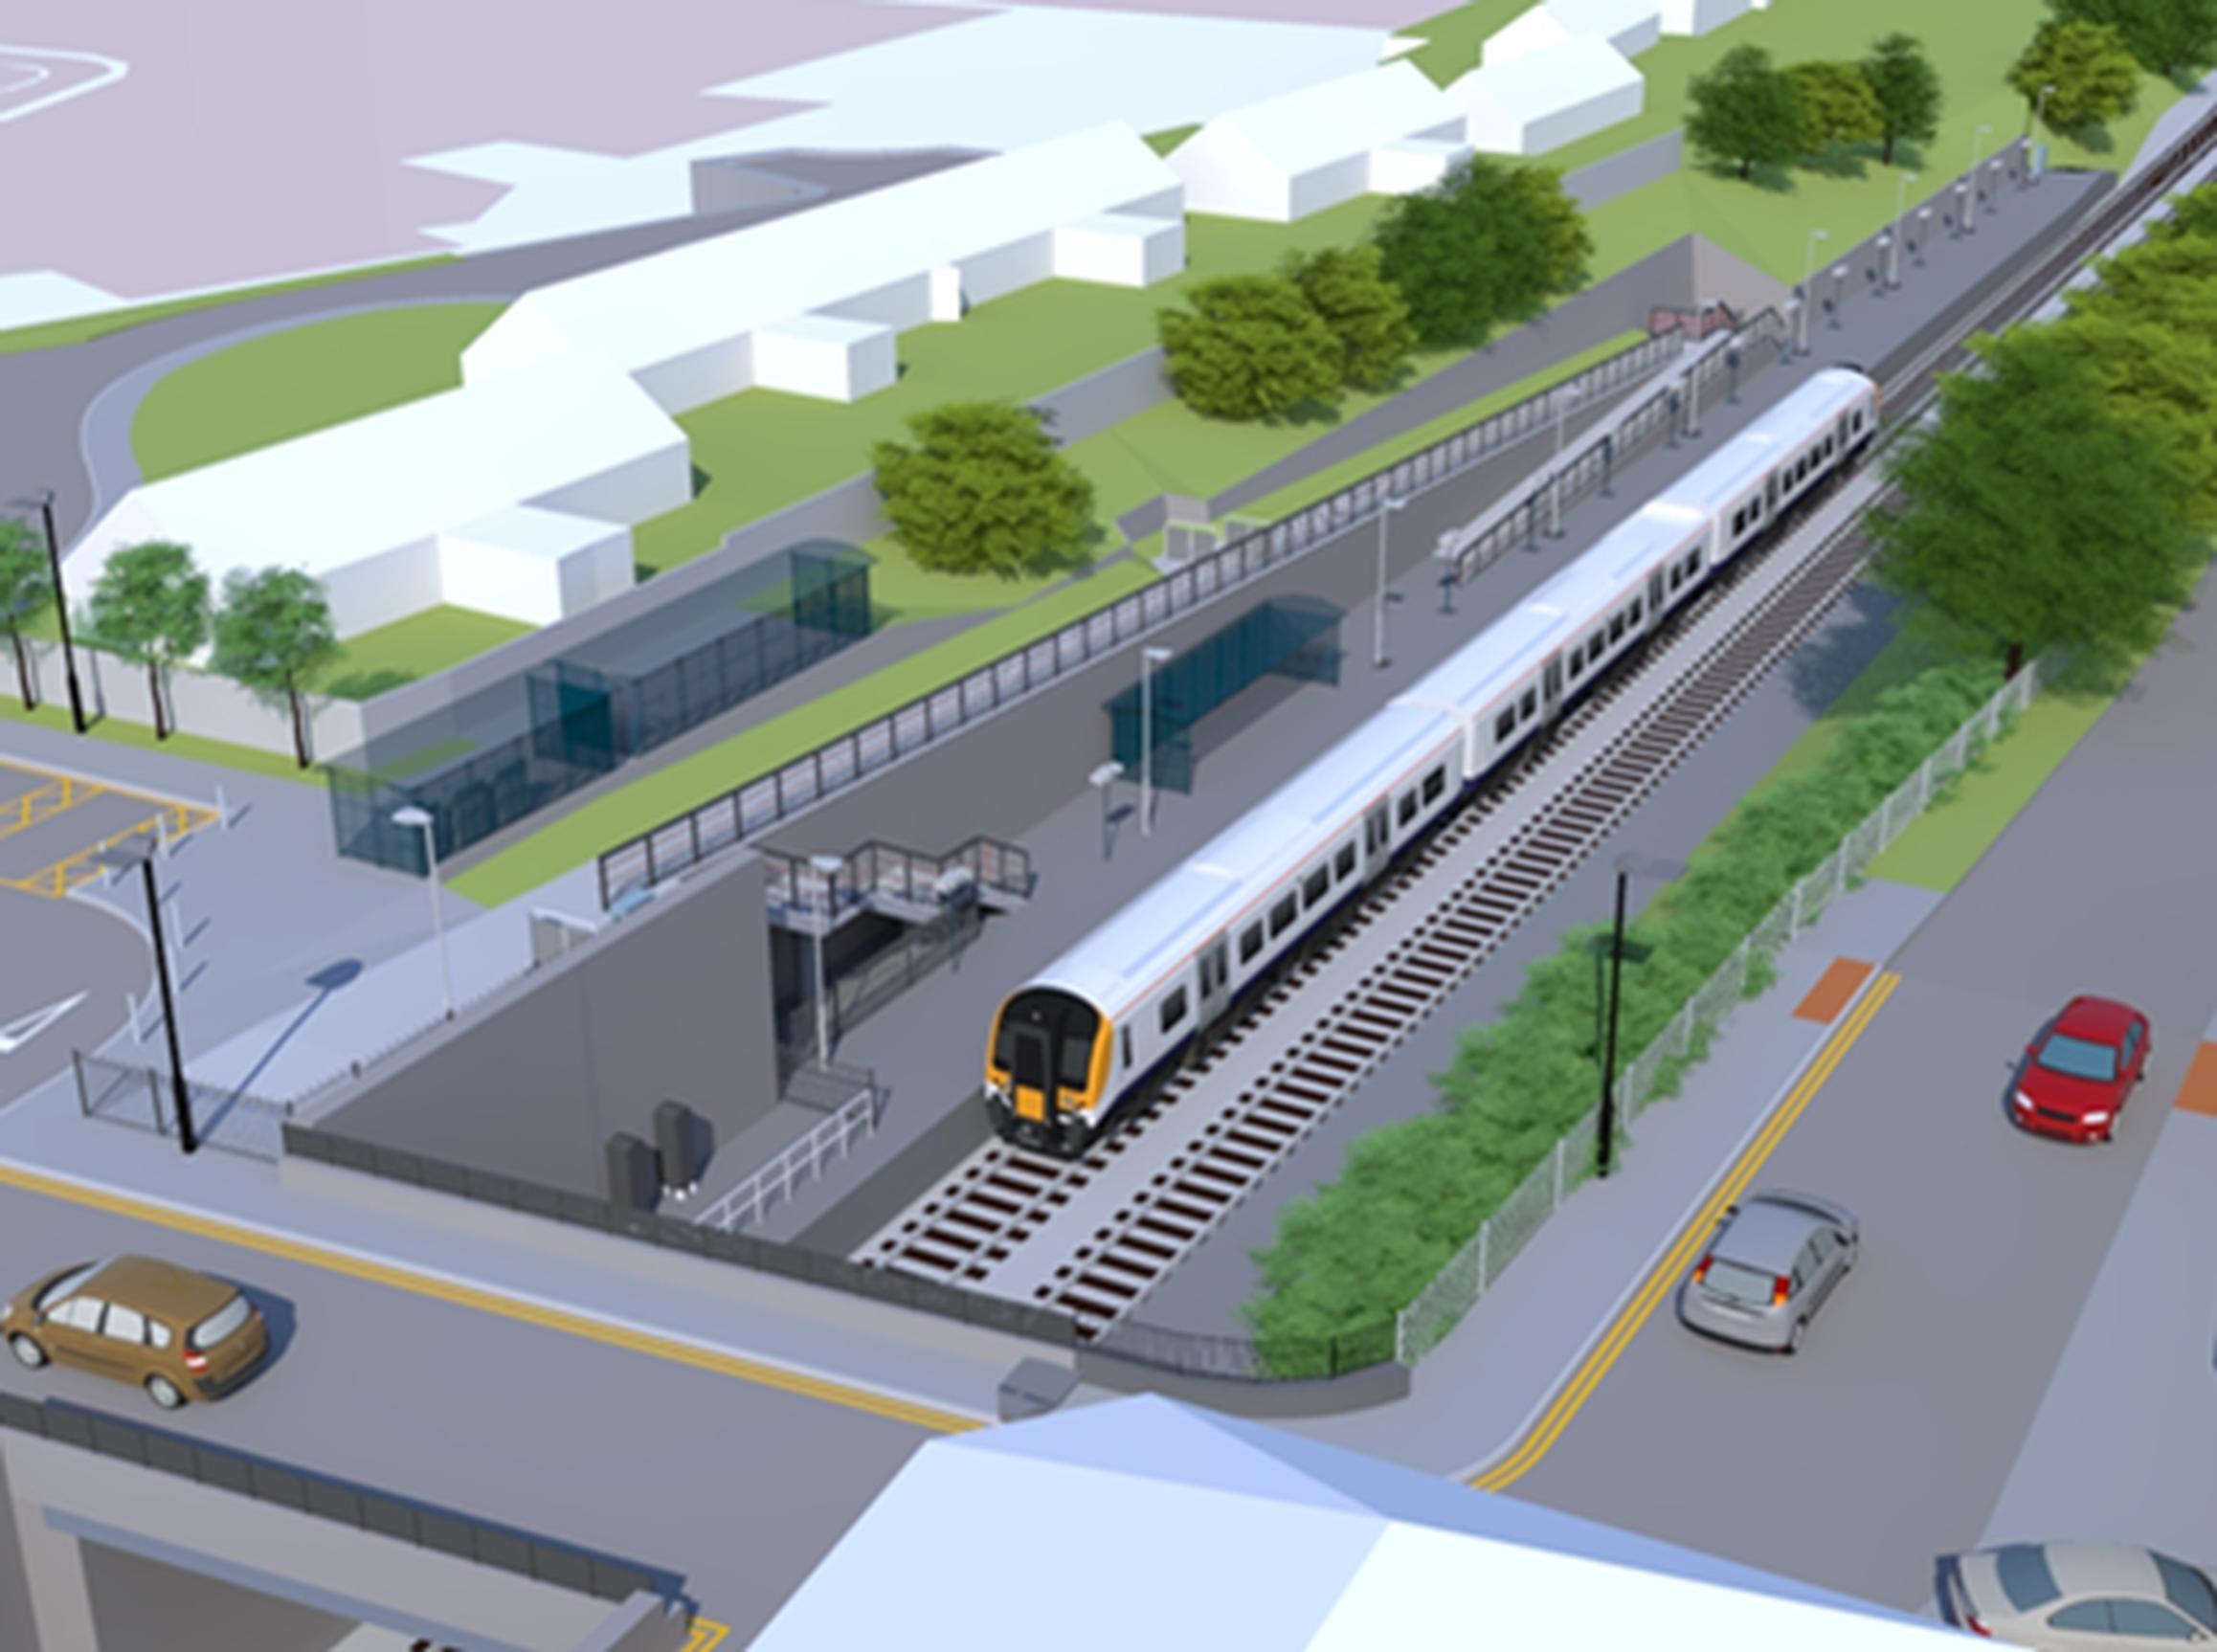 A design of how Pill railway station could look as part of the new plans. Credit: MetroWest